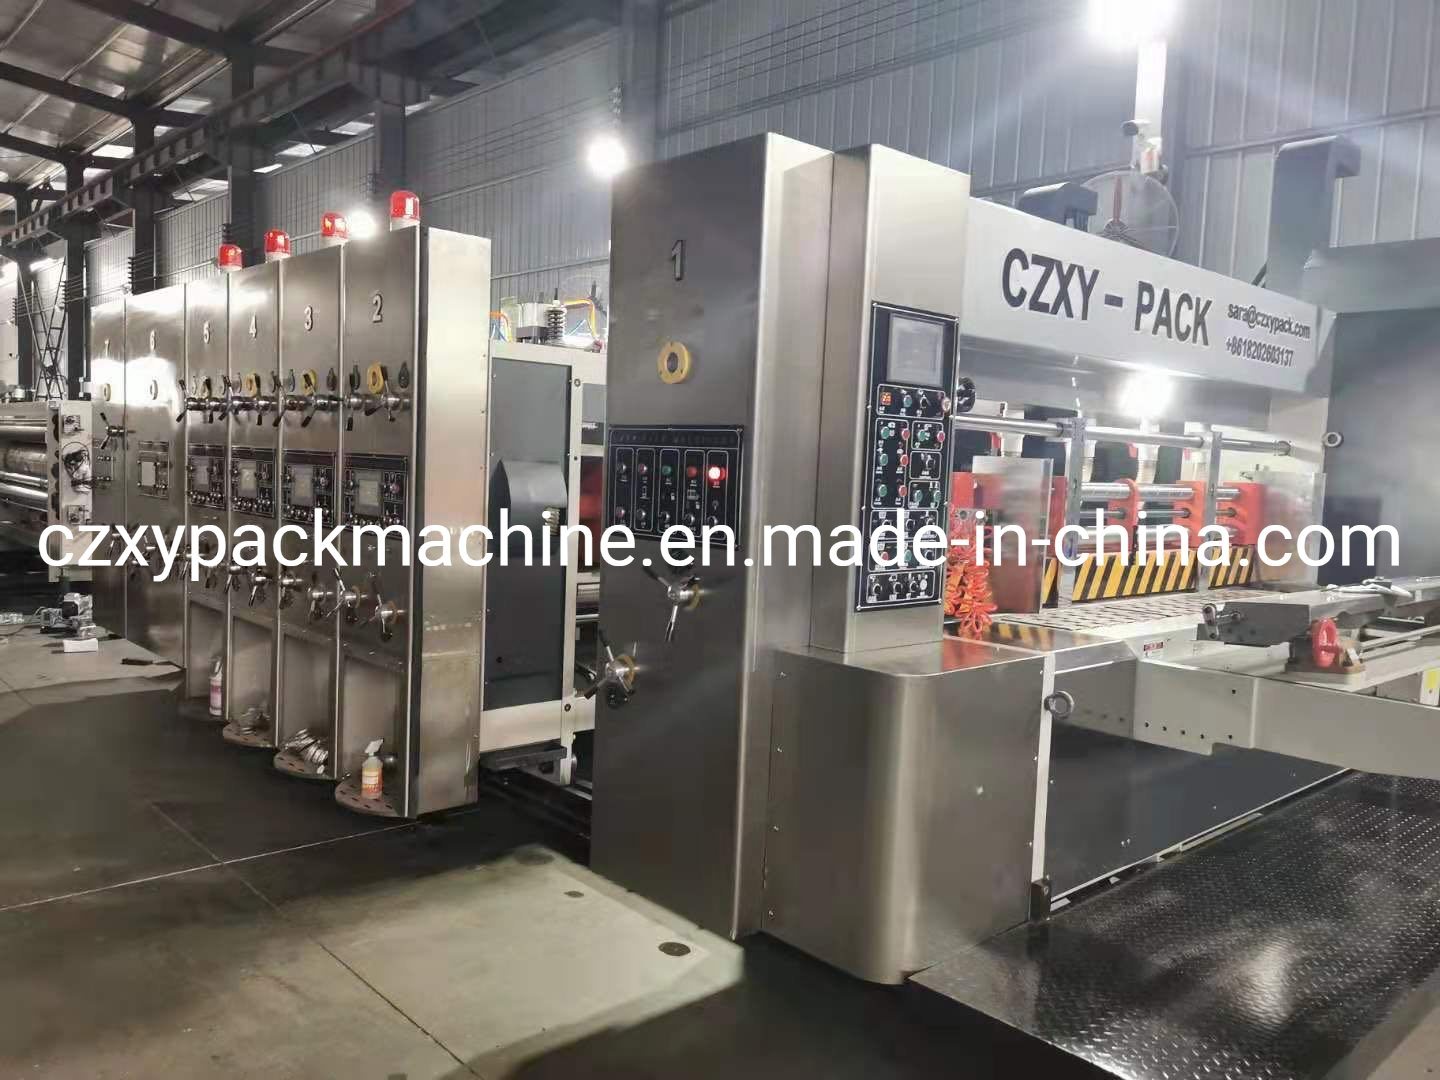 Fully Automatic Carton Printer Slotter Die Cutter Machine with Stacker